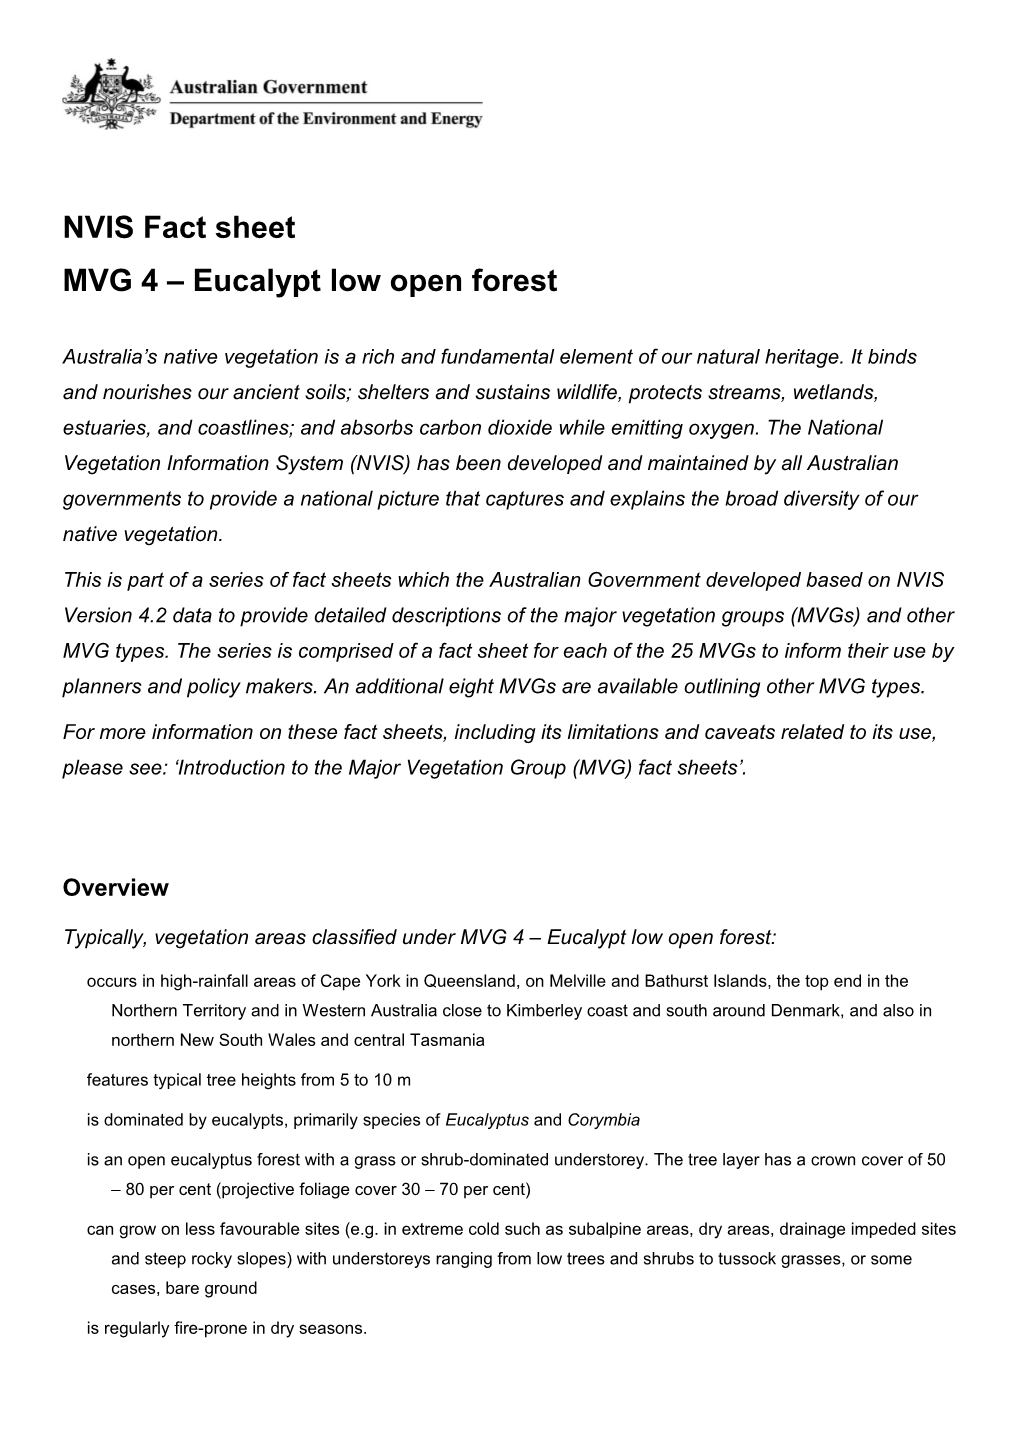 NVIS Fact Sheet MVG 4 Eucalypt Low Open Forest